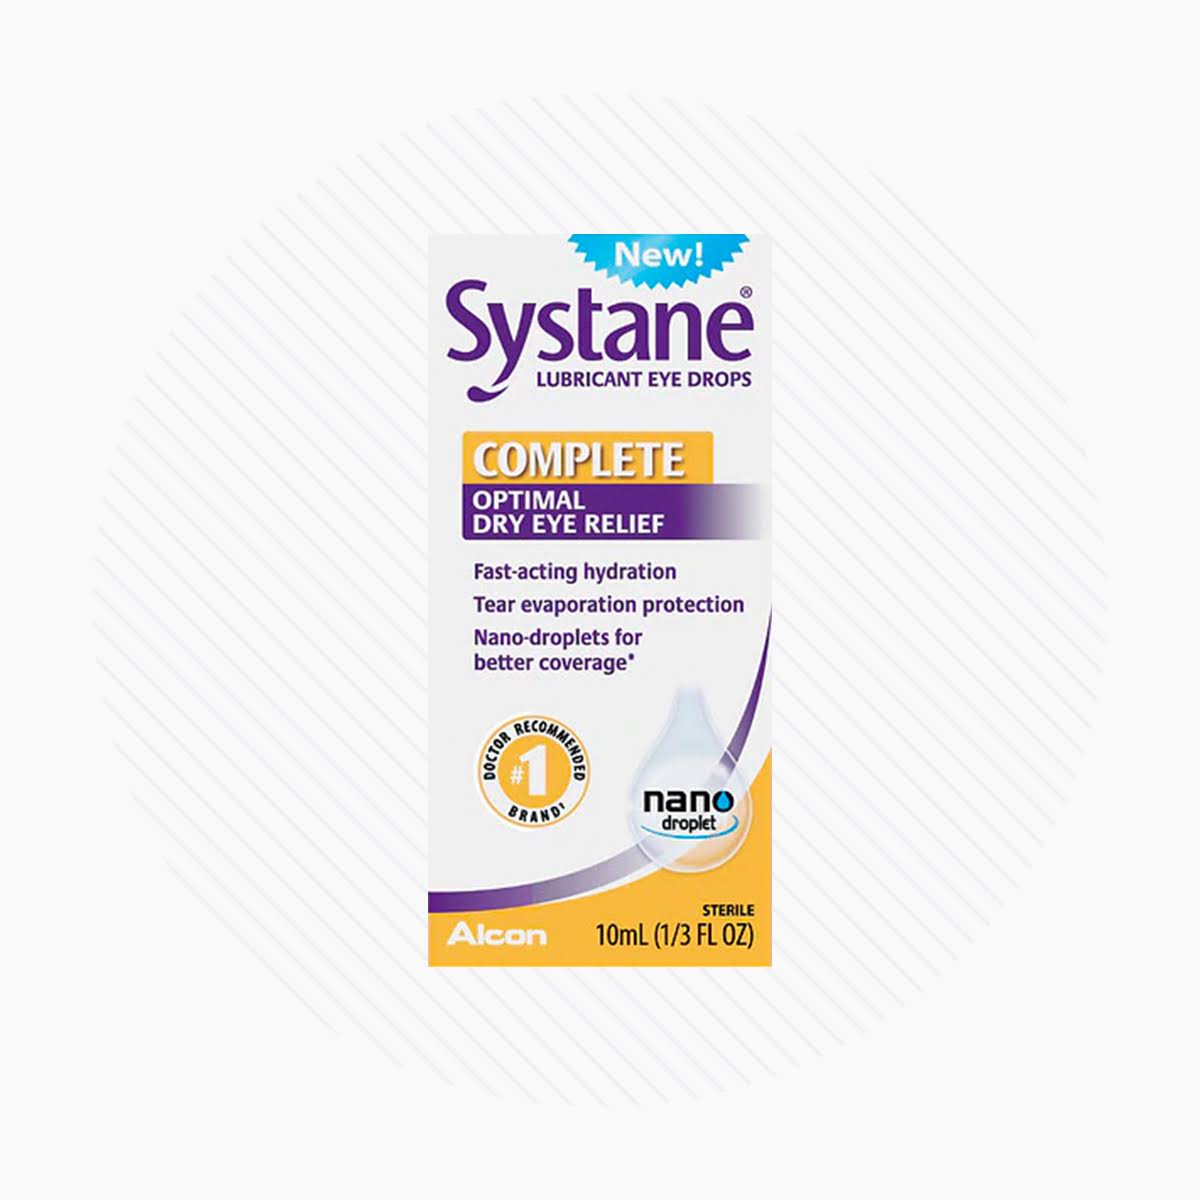 Systane Complete Lubricant Optimal Dry Eye Relief Drops 5ml